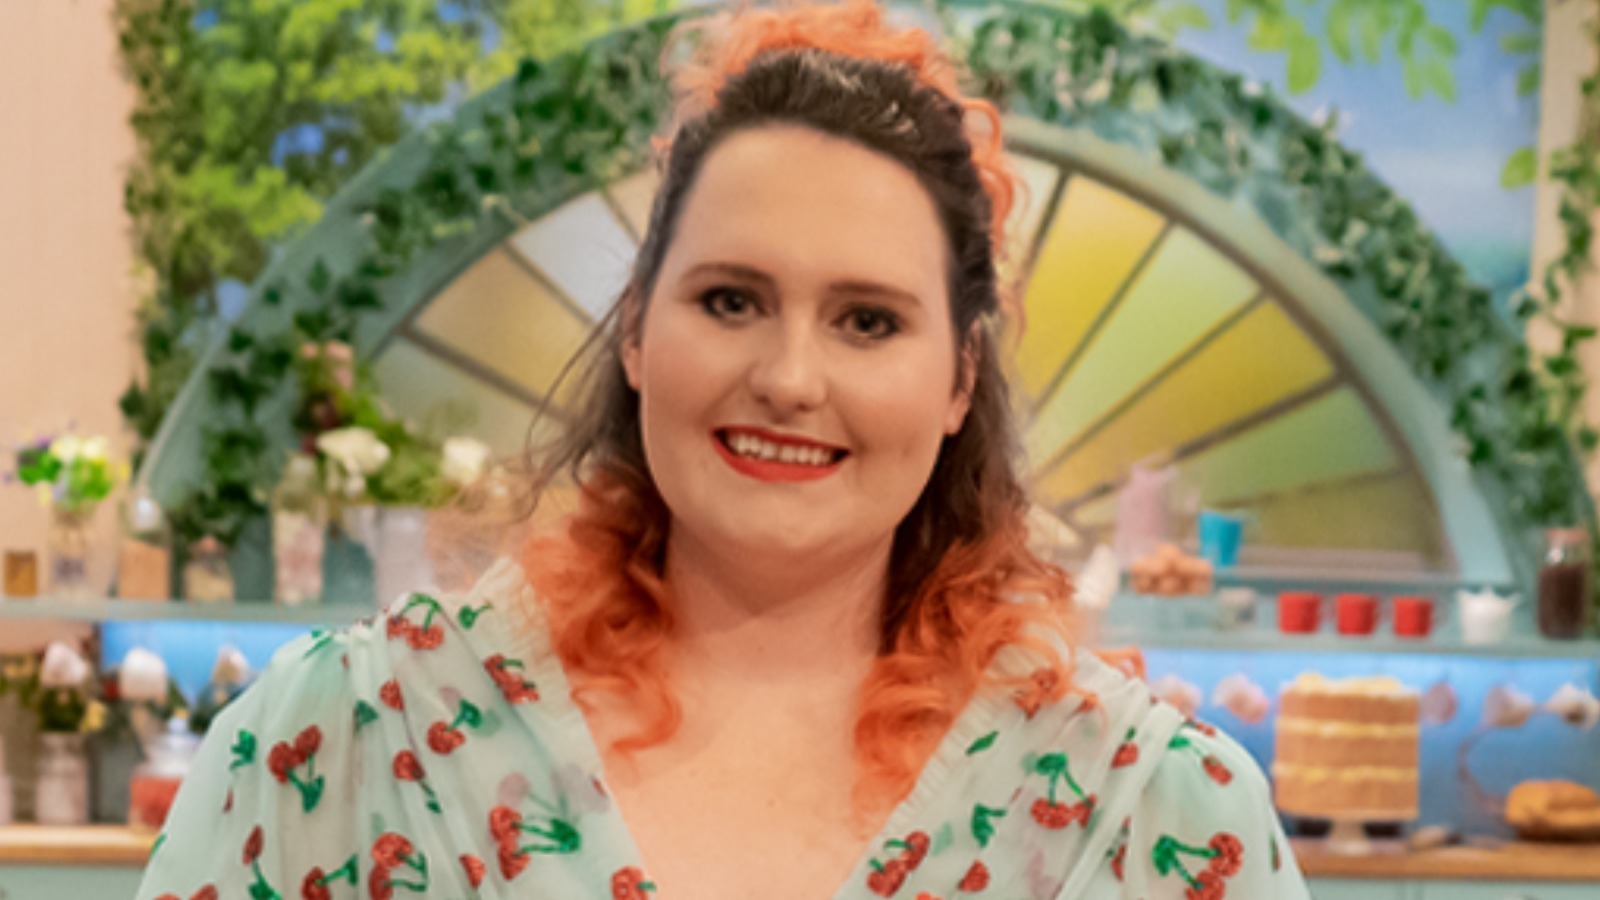 The Truth About Lizzie Acker From The Great British Baking Show Season 12